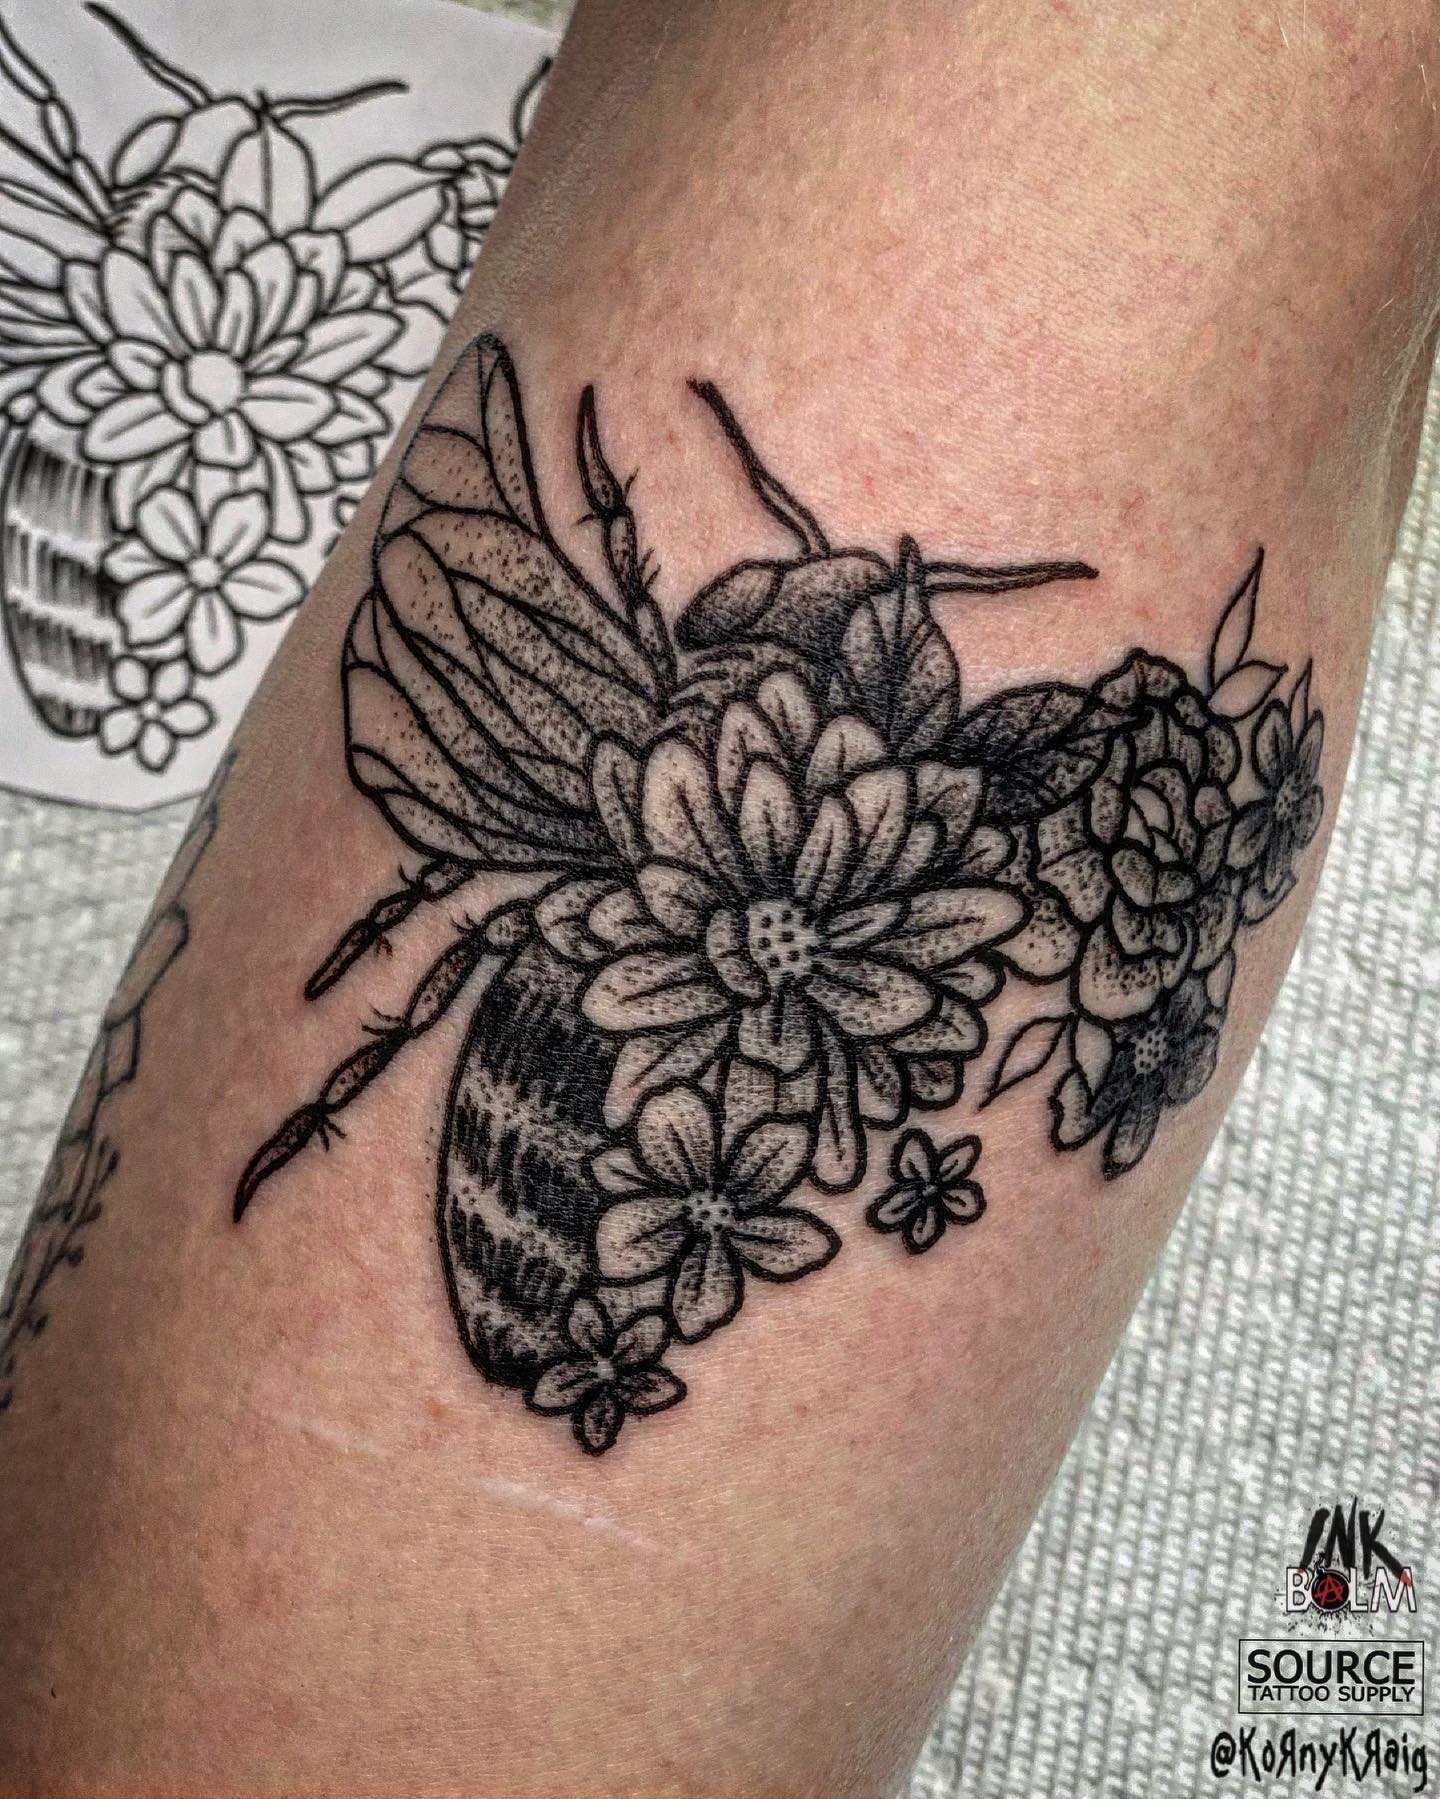  With this tattoo, you're going to show that you're as diligent as a bee. Also, don't forget that a world wouldn't be the same without bees, just like you.